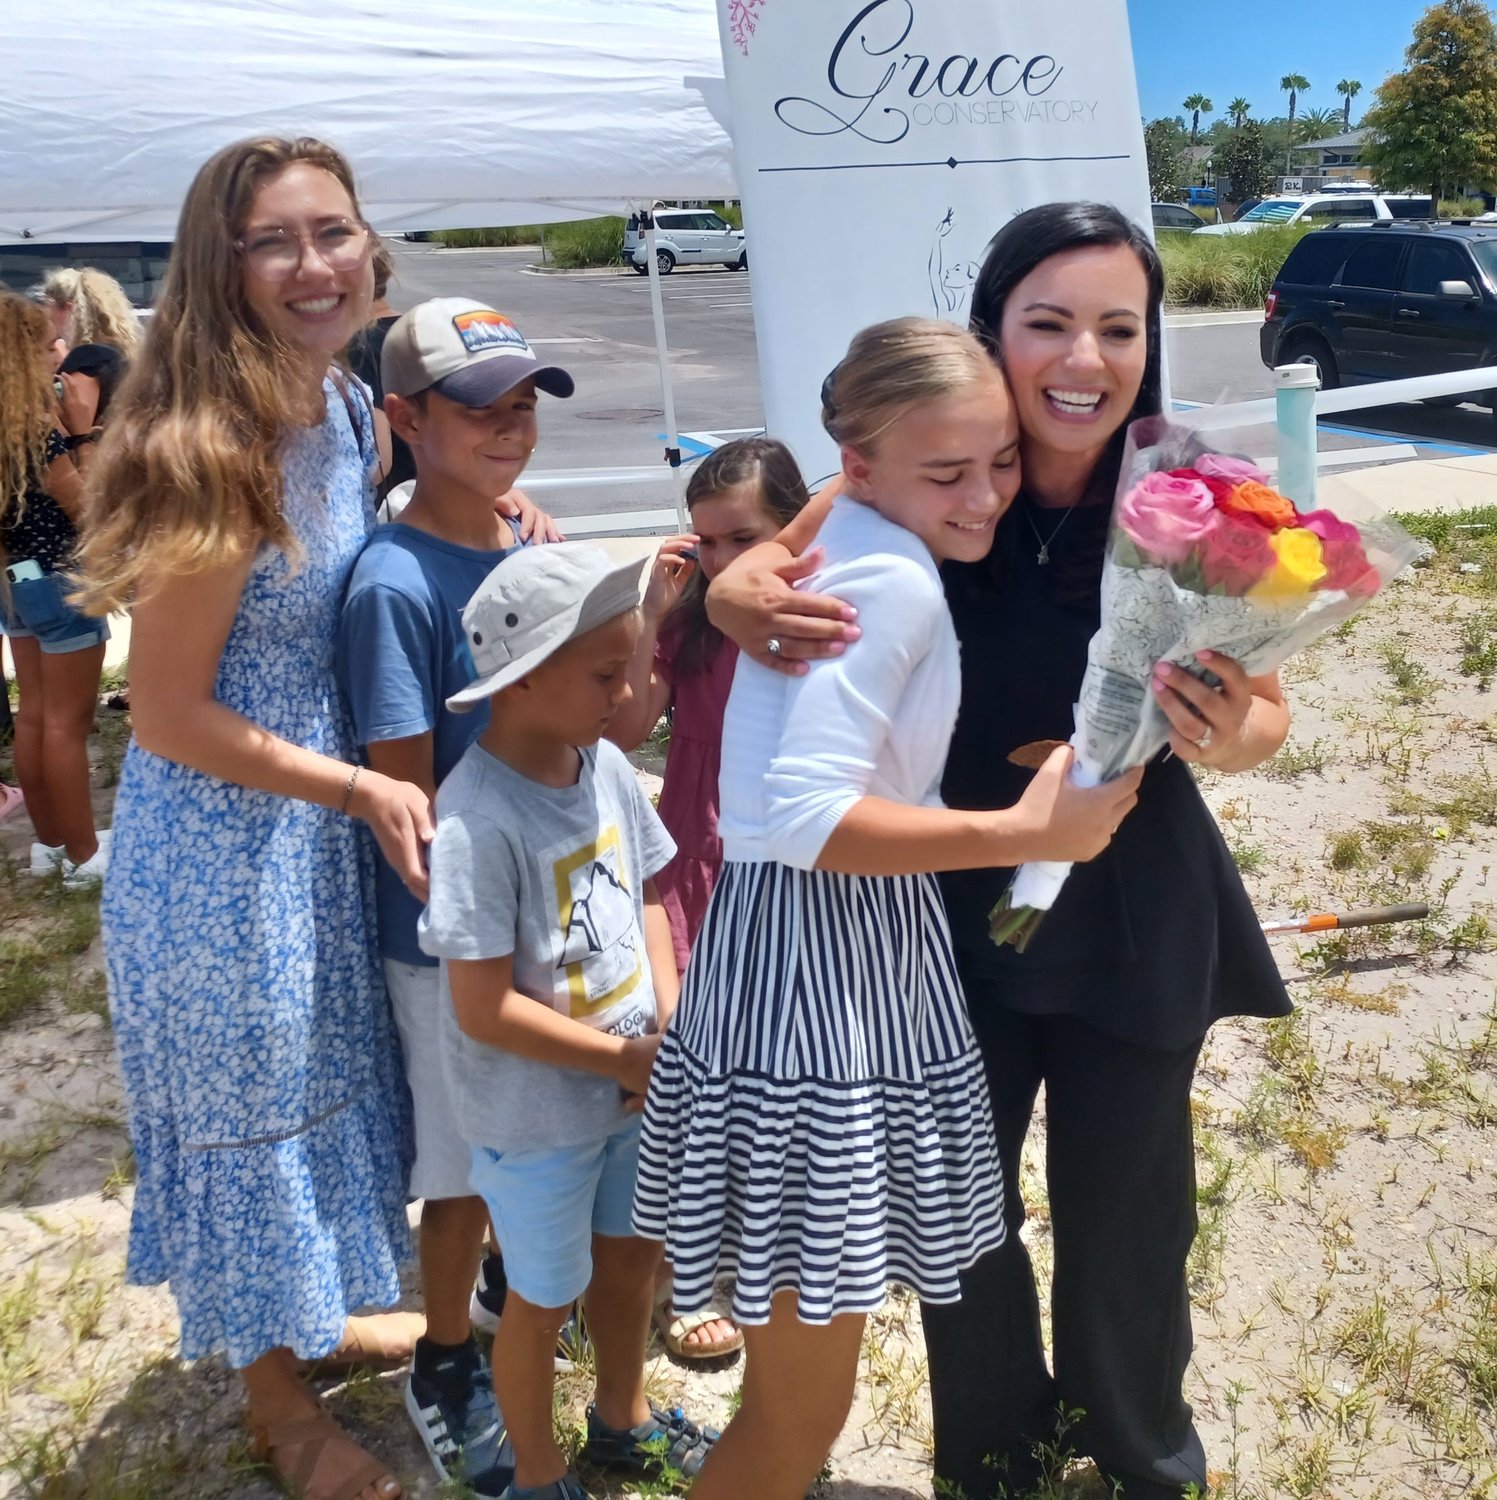 A student presents a bouquet of flowers to Kristina Robison to congratulate her on the groundbreaking for Grace Conservatory’s new dance studio.